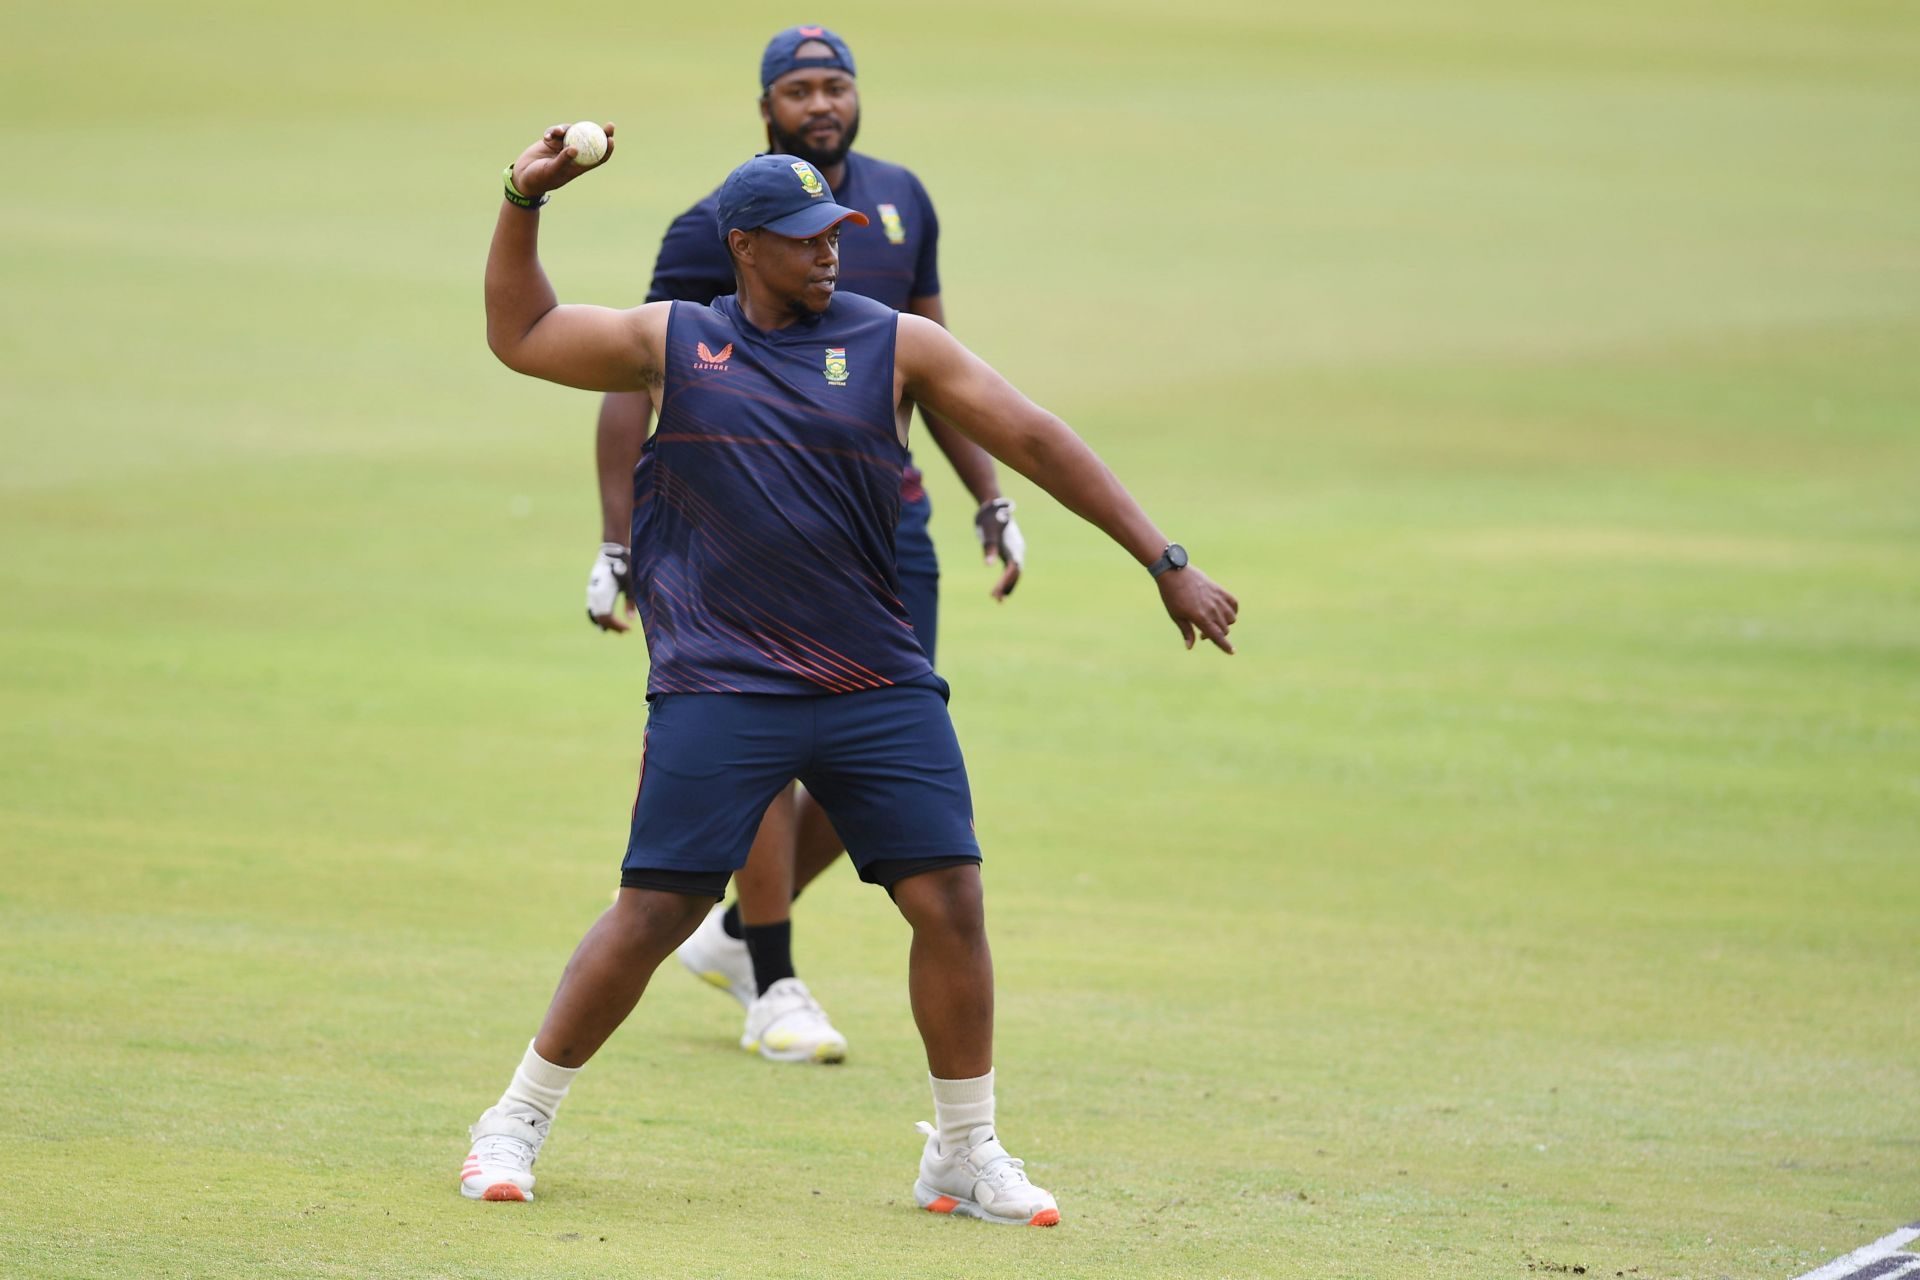 Sisanda Magala is one of the more promising all-rounders in South African cricketing circles. Sisanda Magala represents the Lions in domestic cricket (Picture Credits: Gallo Images via News24).